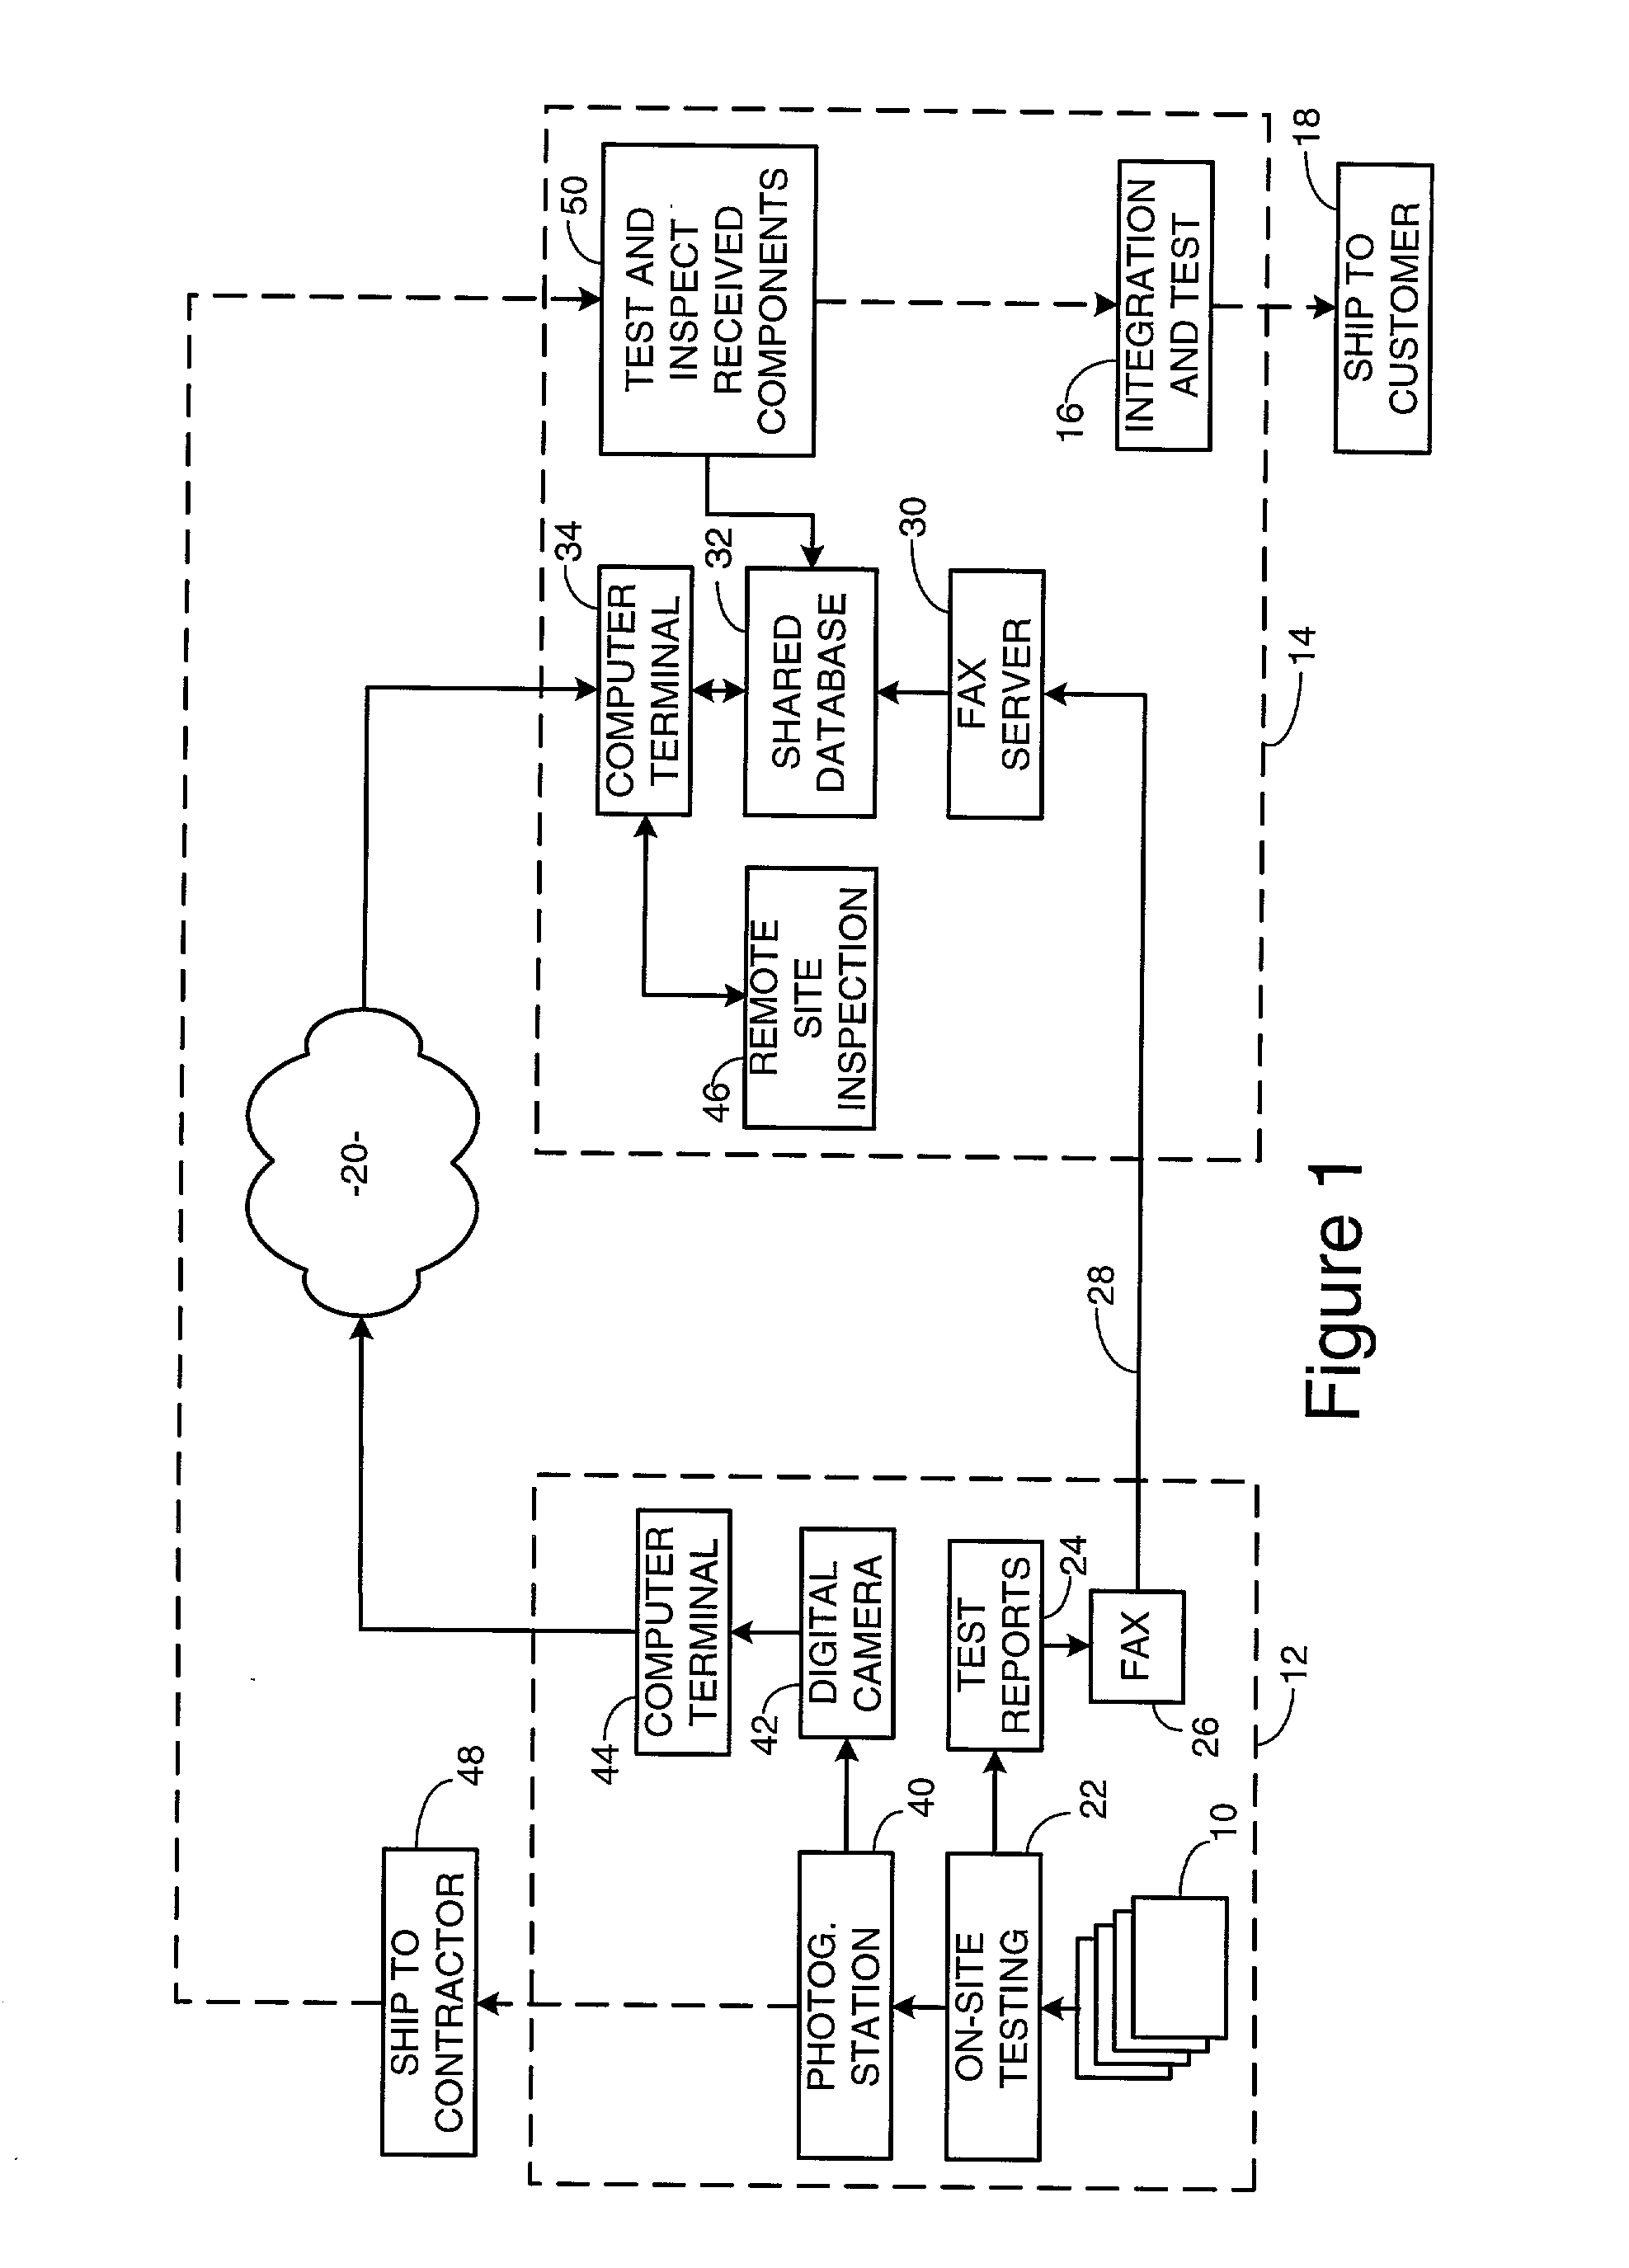 Electronic source inspection process